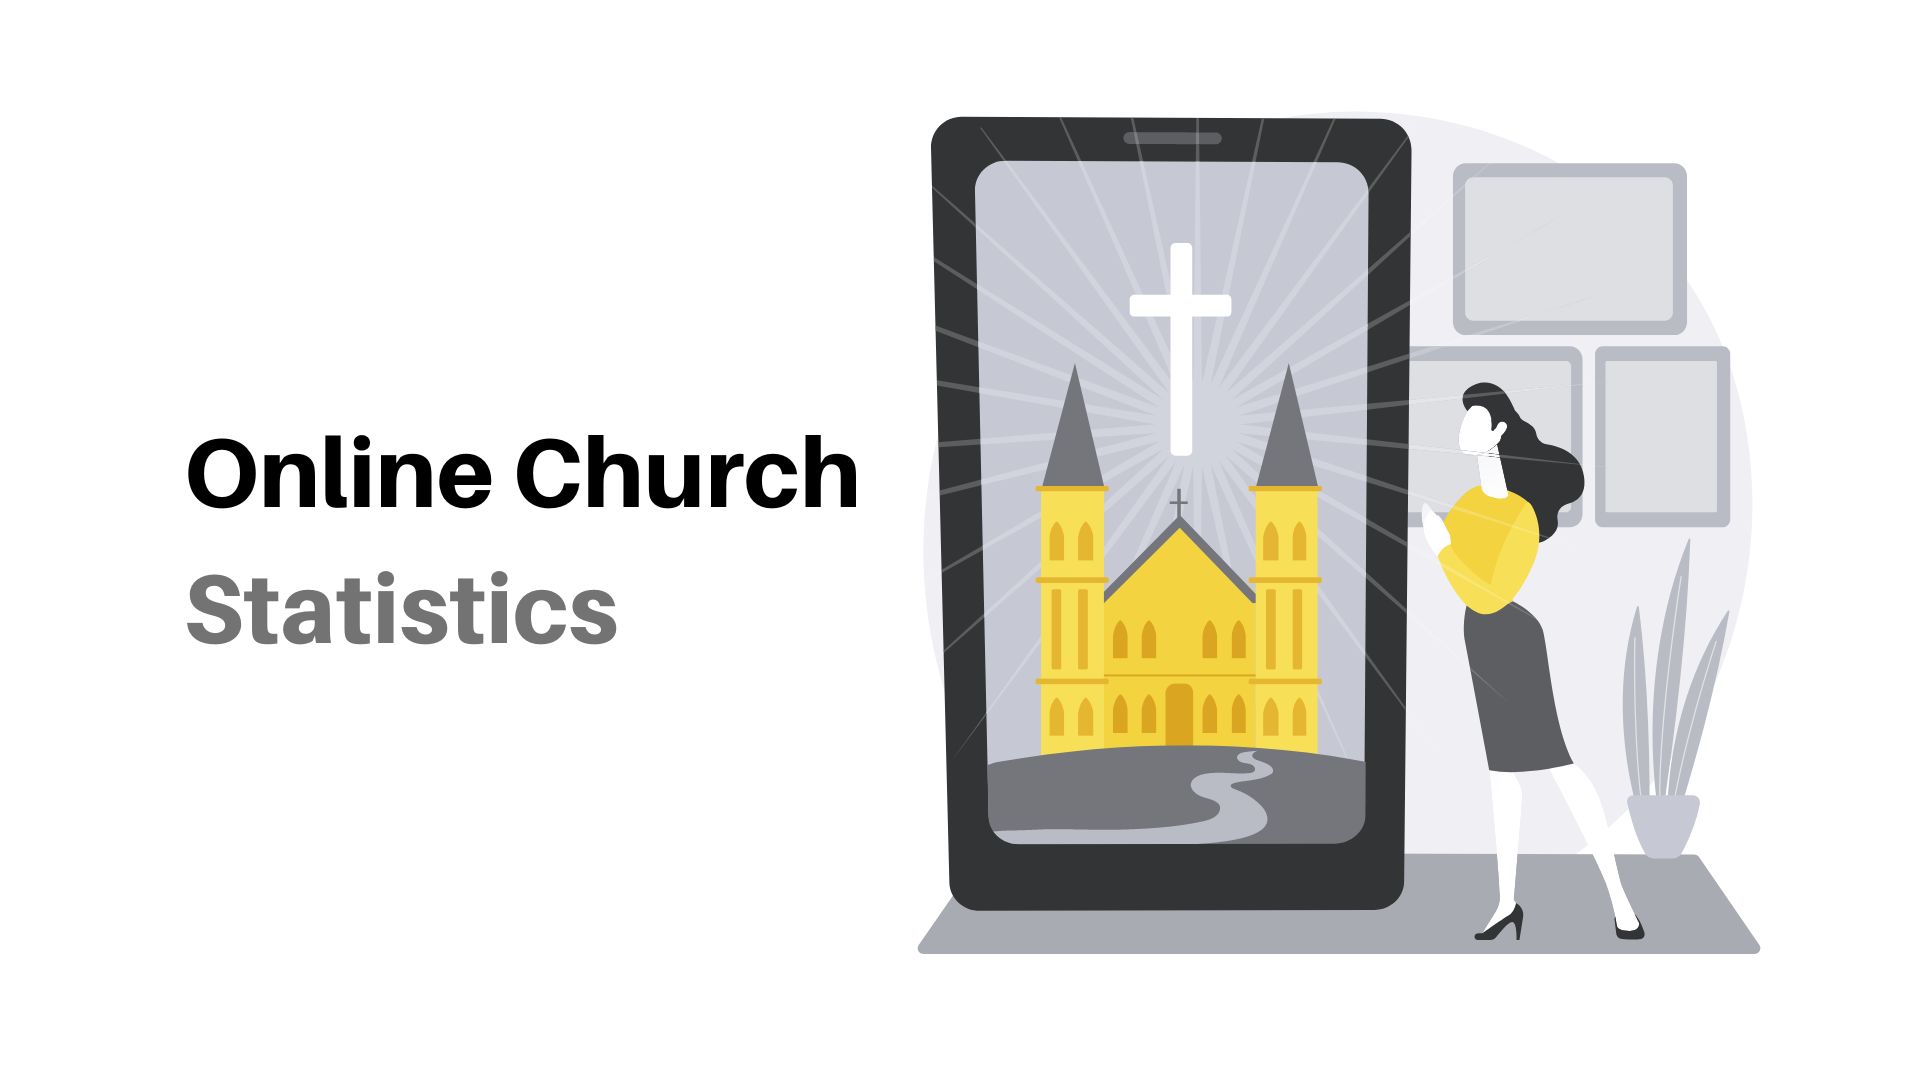 Online Church Statistics By Worshipers, Types, Broadcast, Online Giving, Reasons and Live Streaming Services